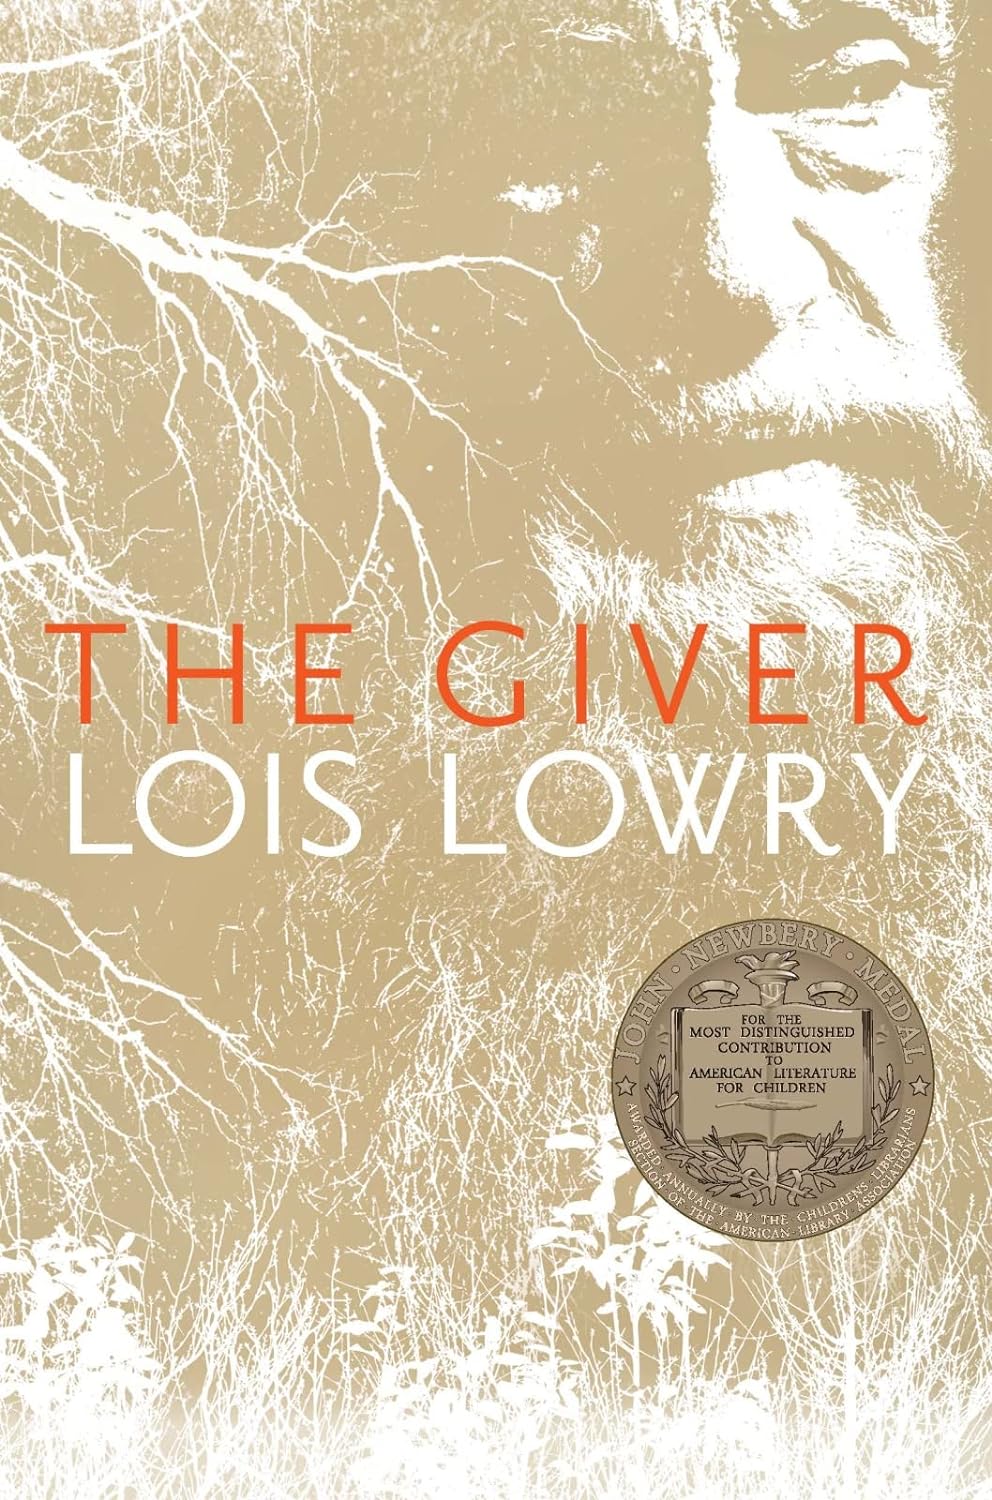 The Giver by Lois Lowry (1993)